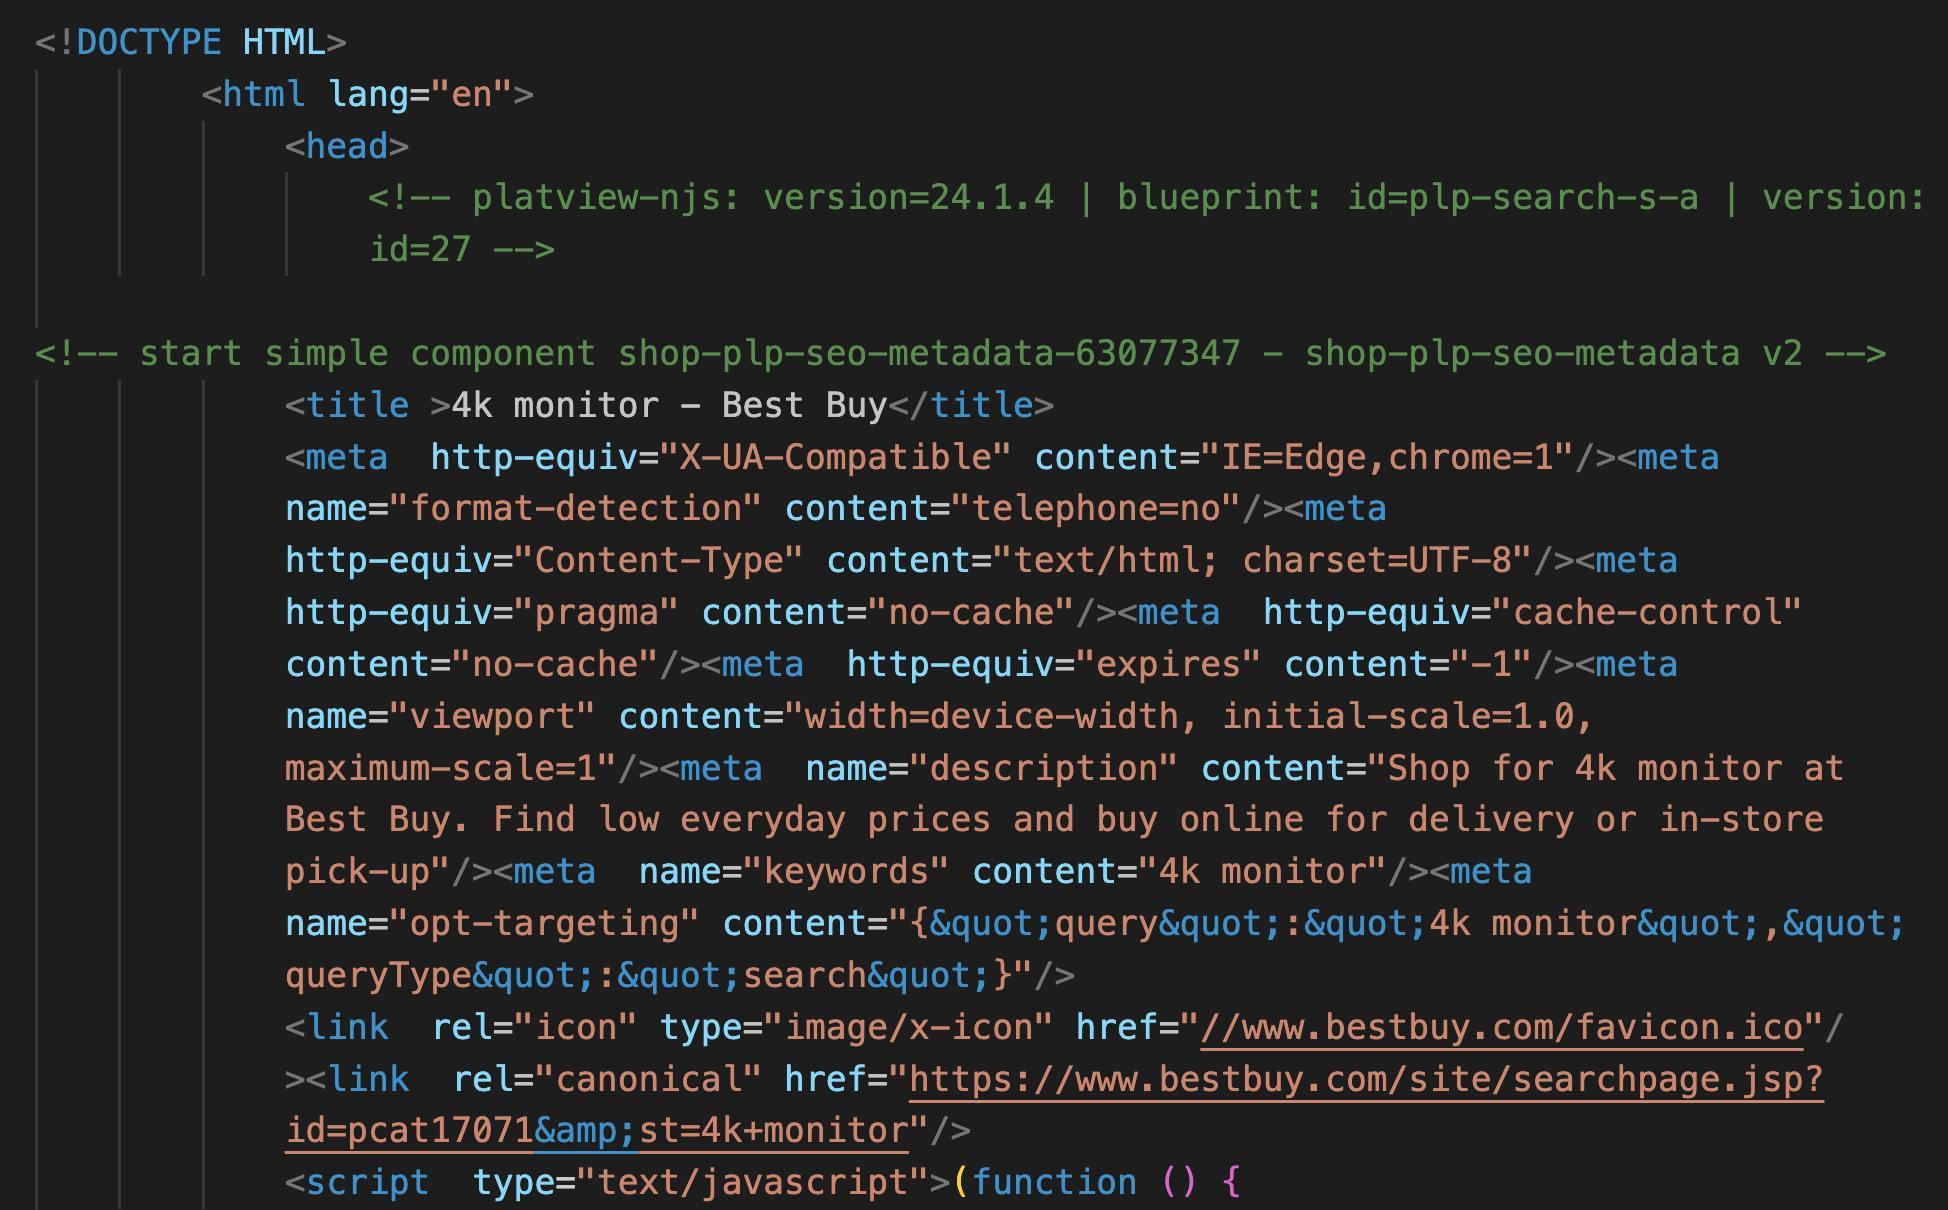 An HTML file with HTML content